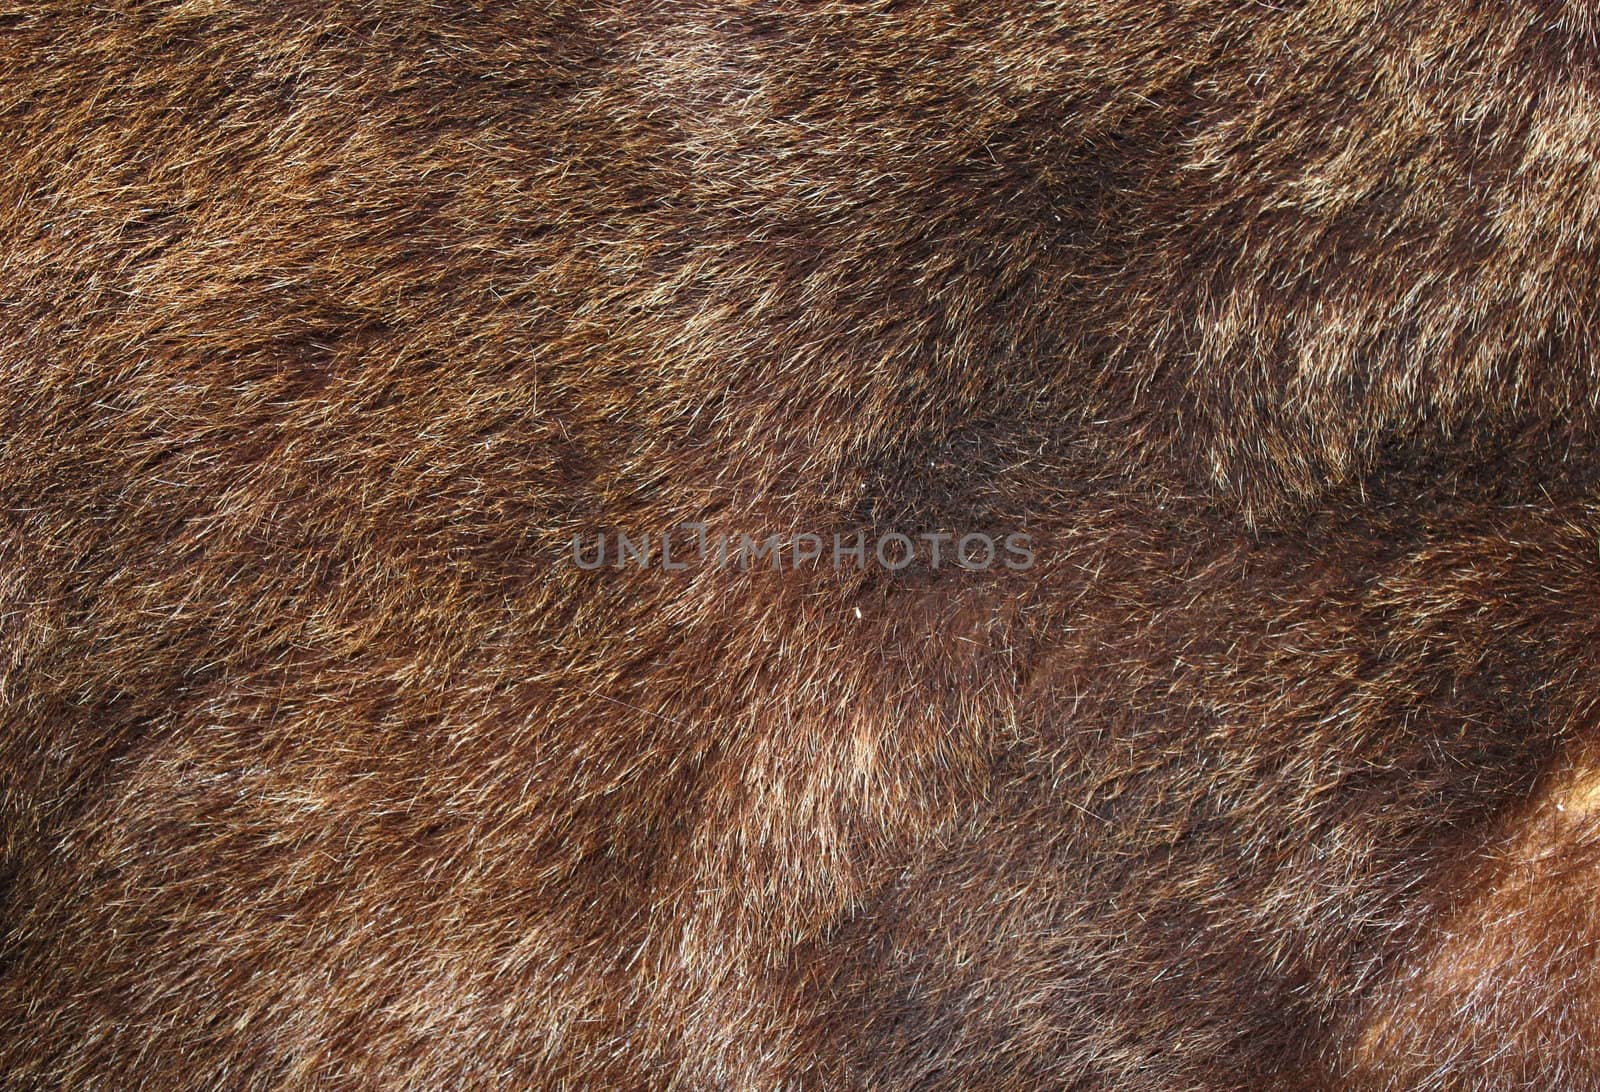 texture of brown bear fur hunted in Rondei mountains, the Carpathians, Romania